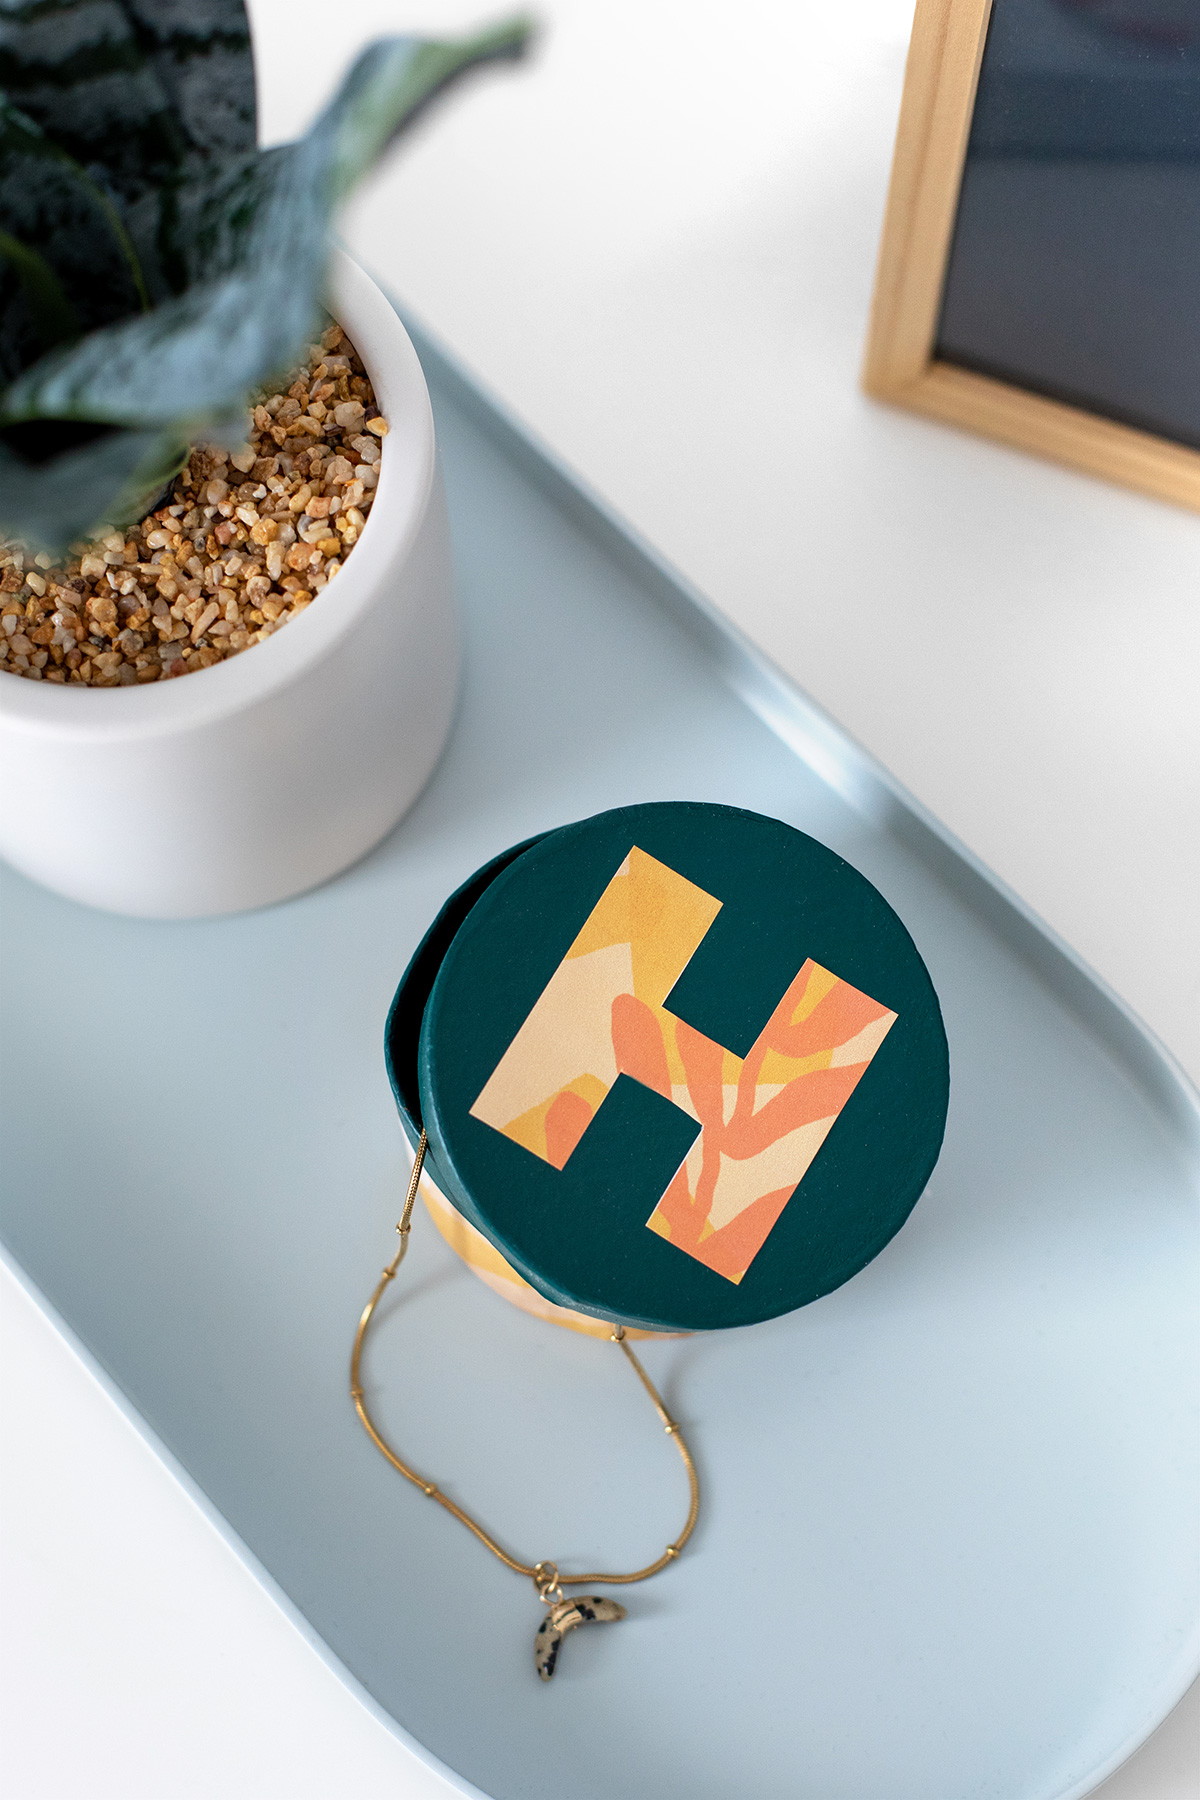 DIY Tropical Monogram Trinket Box /// By ctrl + curate for Design Fixation #diy #craft #letter #gift 